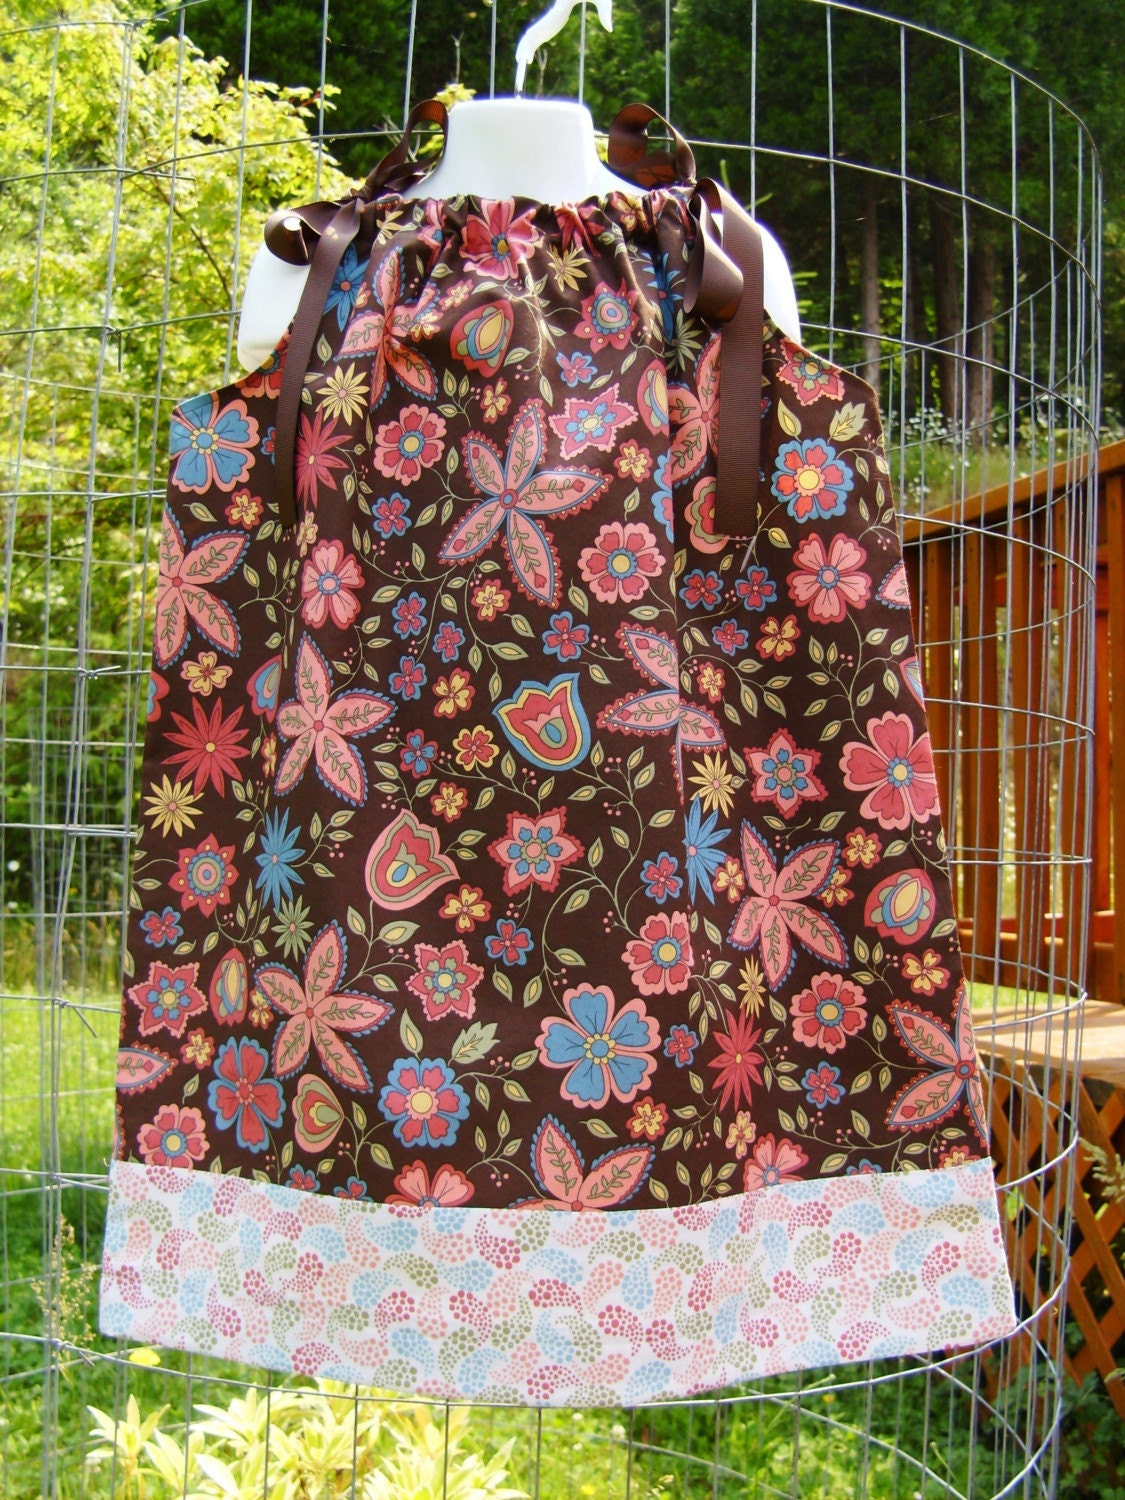 Chocolate Floral Garden with Paisley Border Girls Pillowcase Dress 12 mos 18 mos 2T 3T 4 5 6